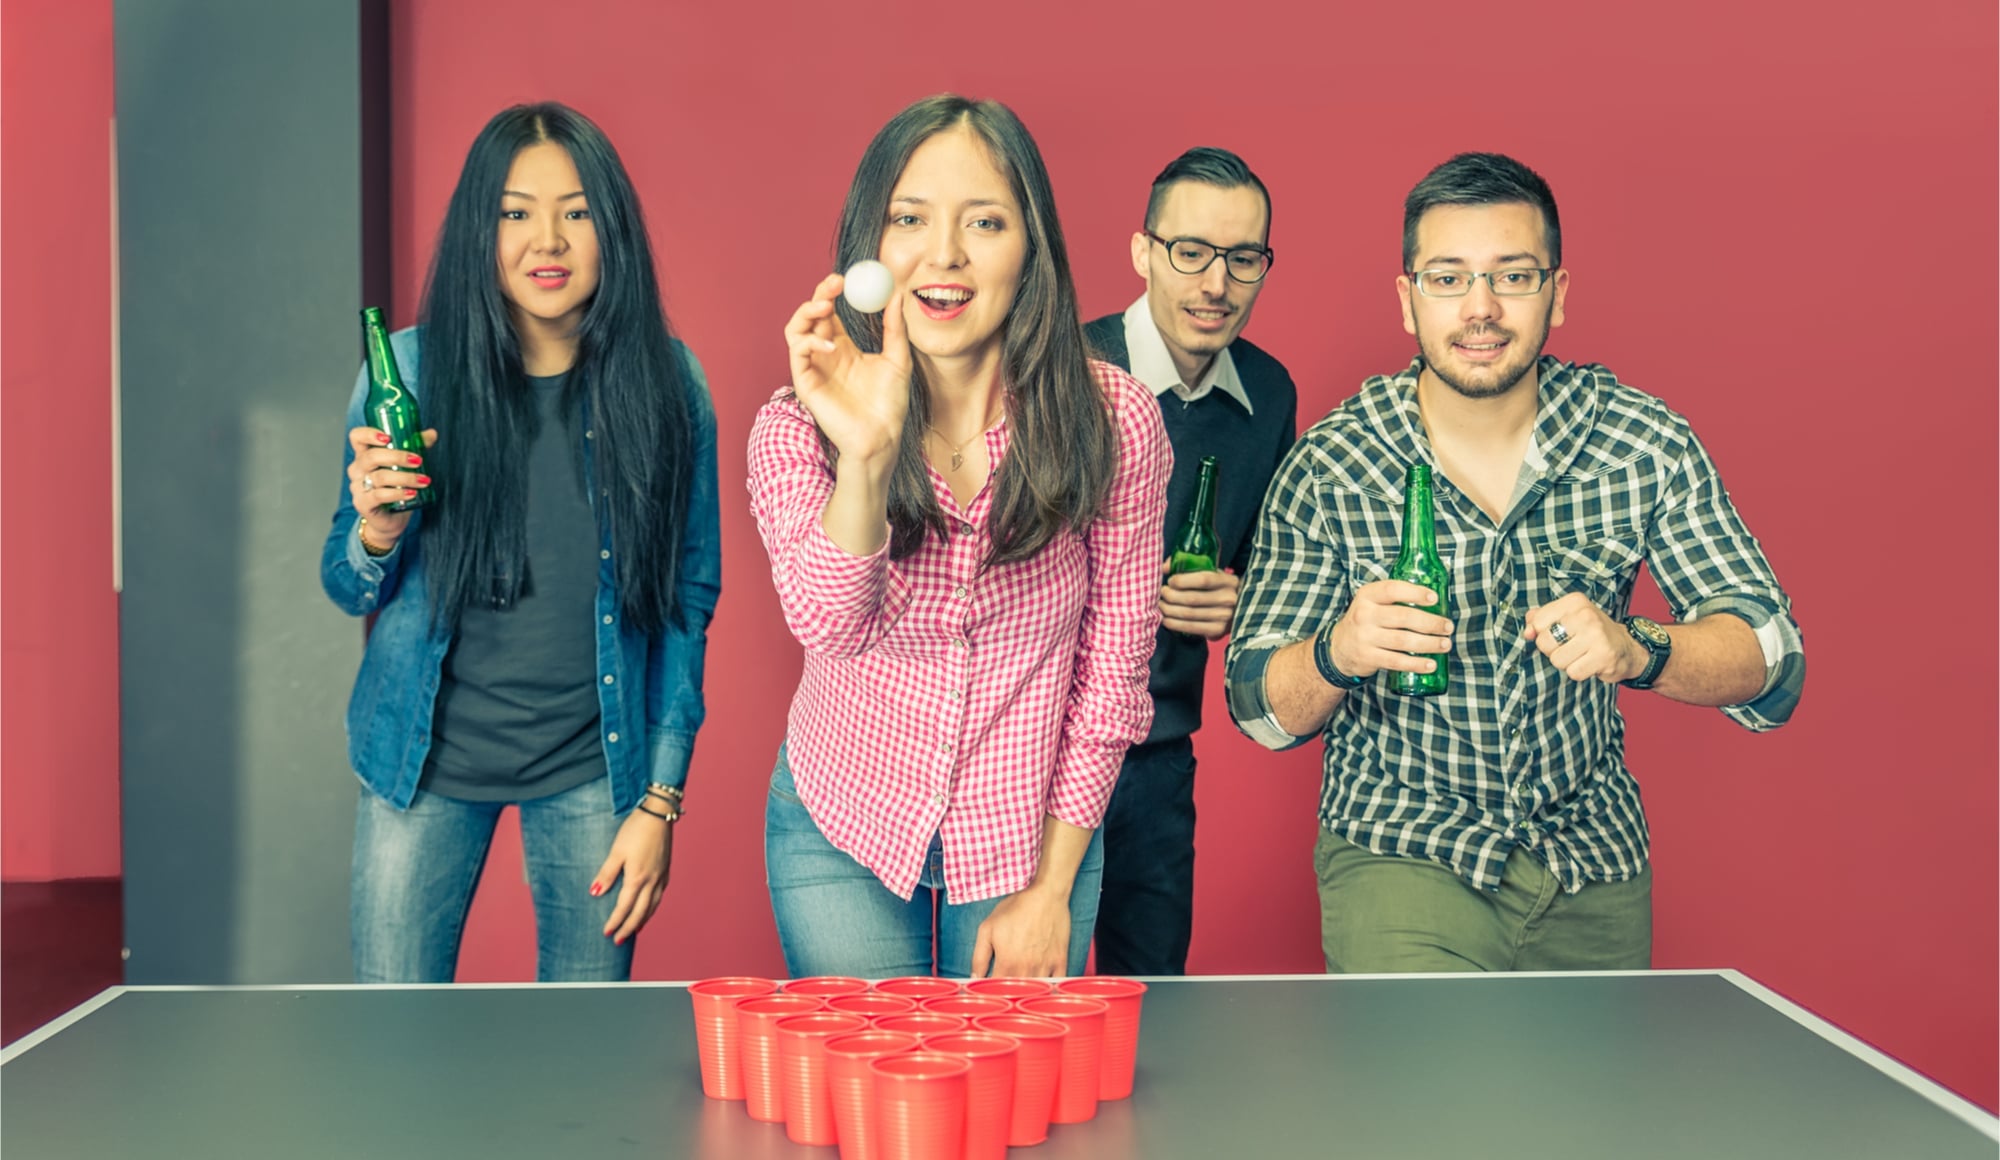 4 Most Commonly Abused Drugs on College Campuses Pathfinders - 2 women and 2 men play beer pong during a study break in college. Alcohol is the most abused college drug.